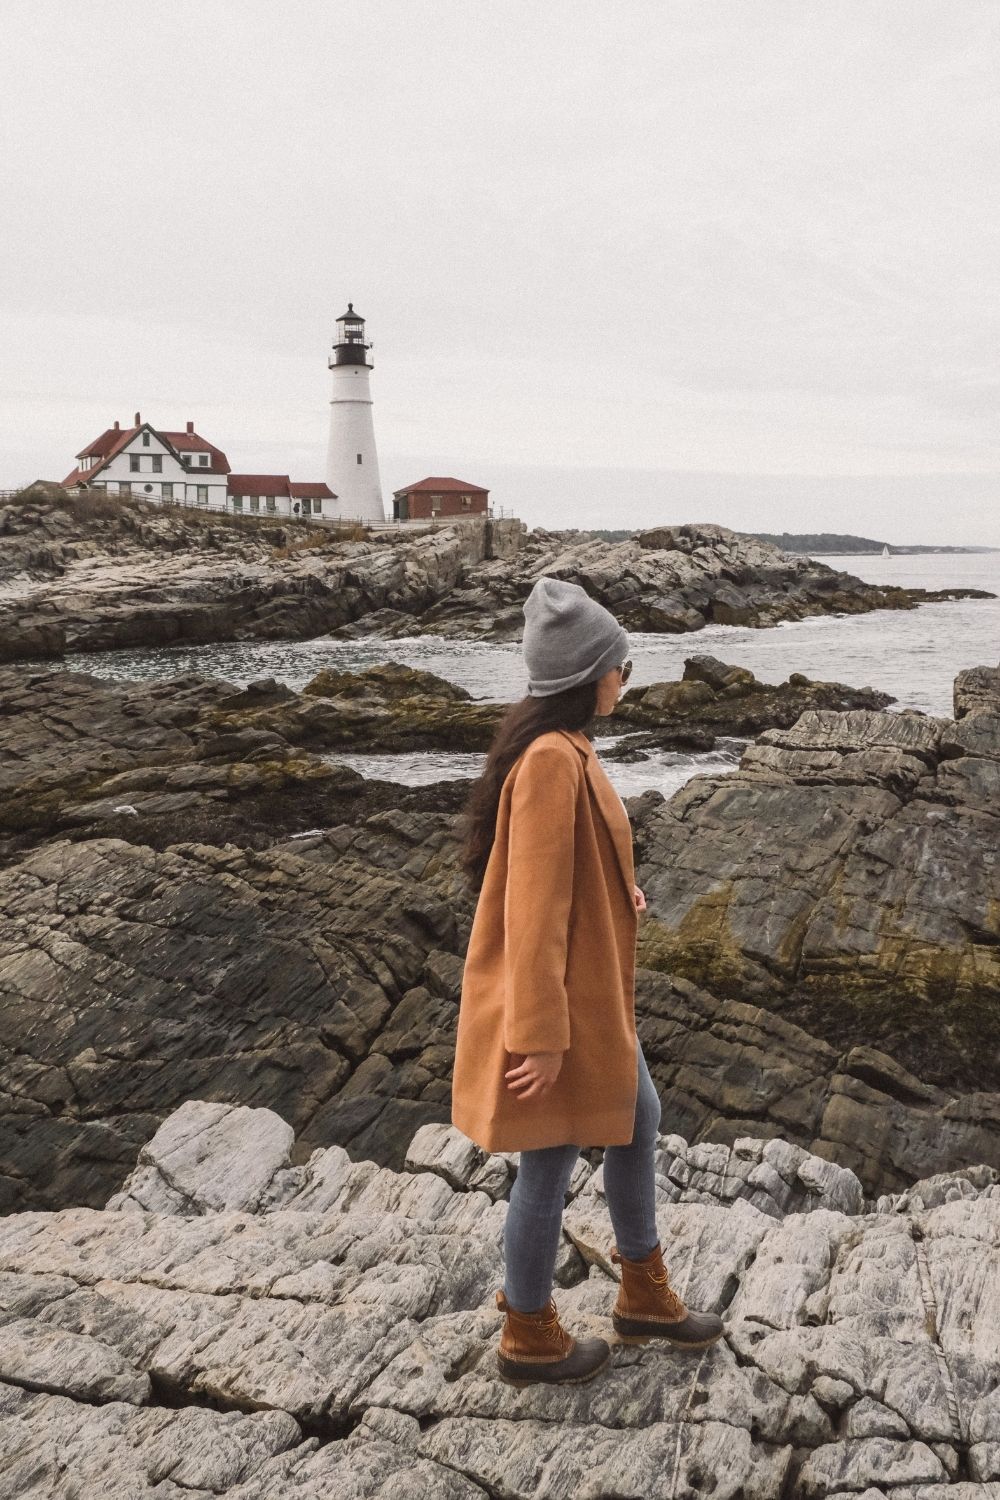 10 Best Things To Do In Portland, Maine